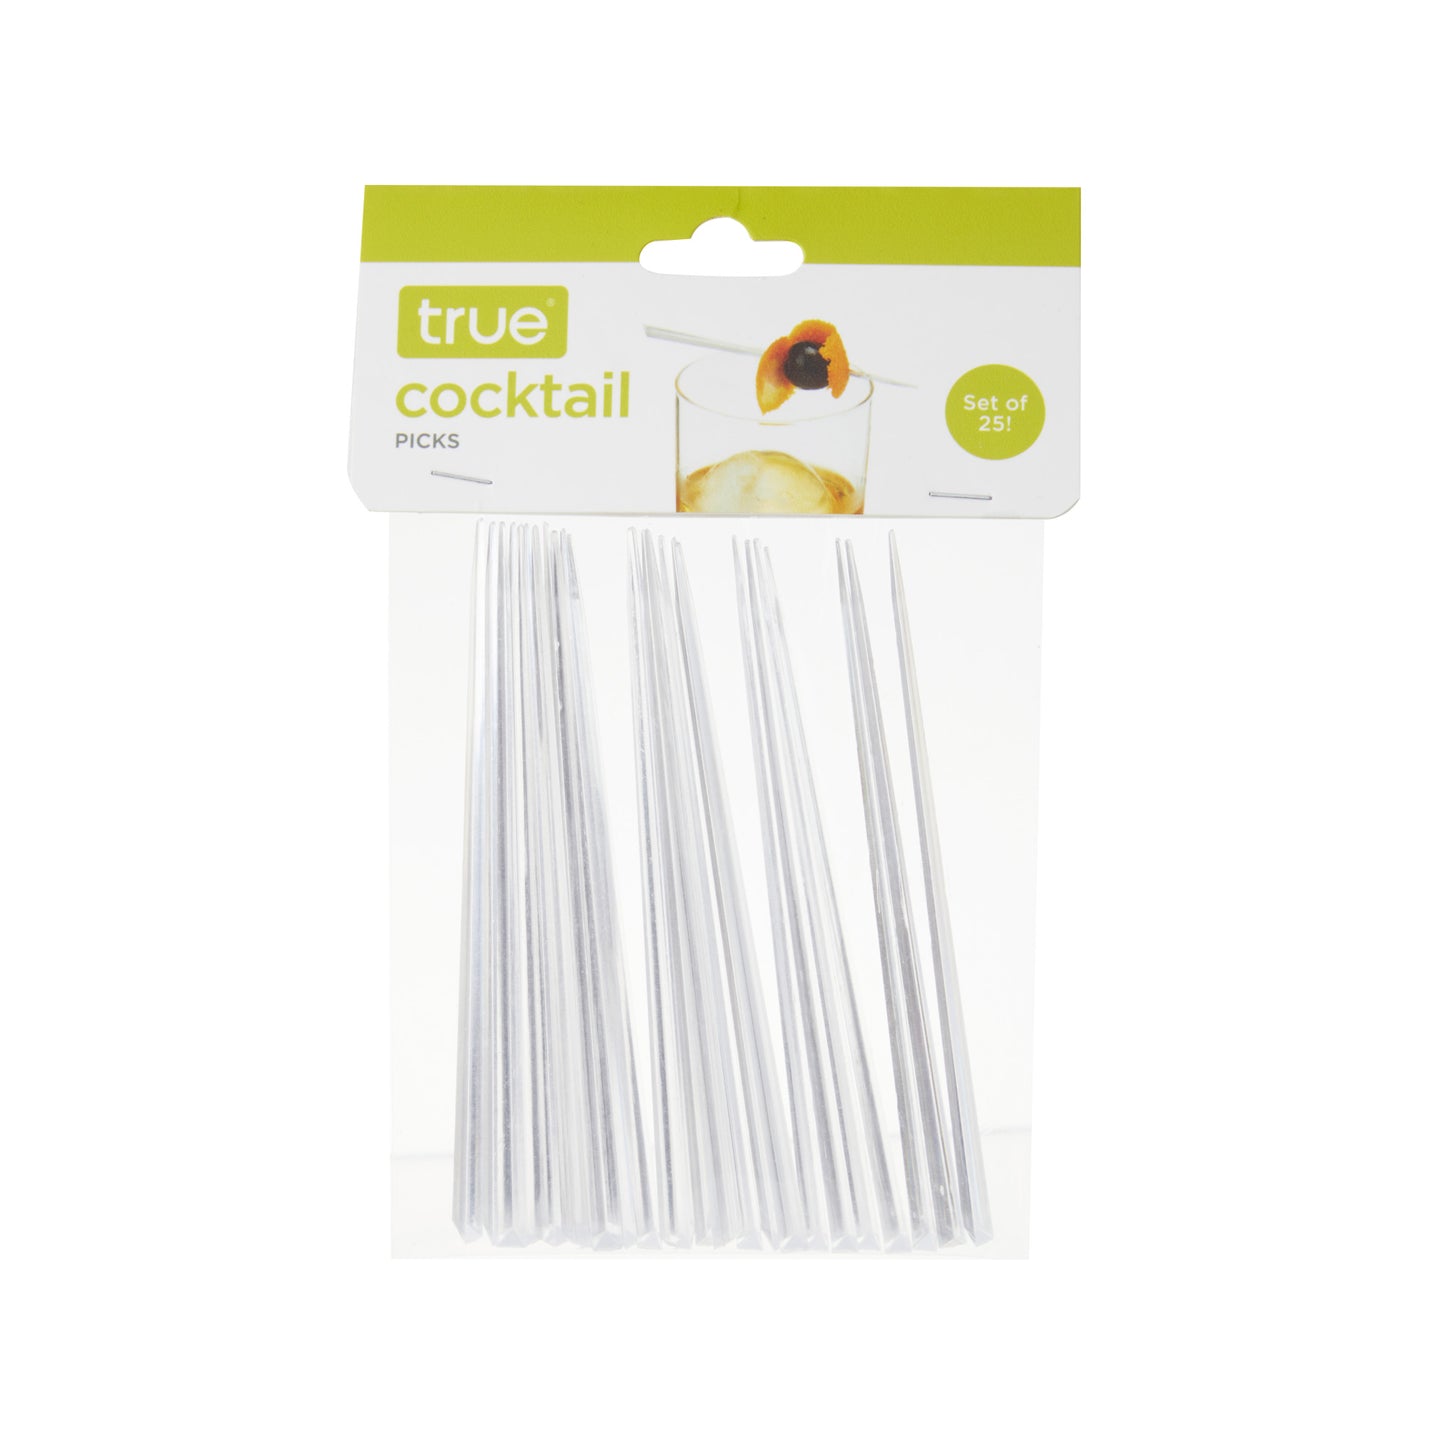 Cocktail Picks, Set of 25 by True